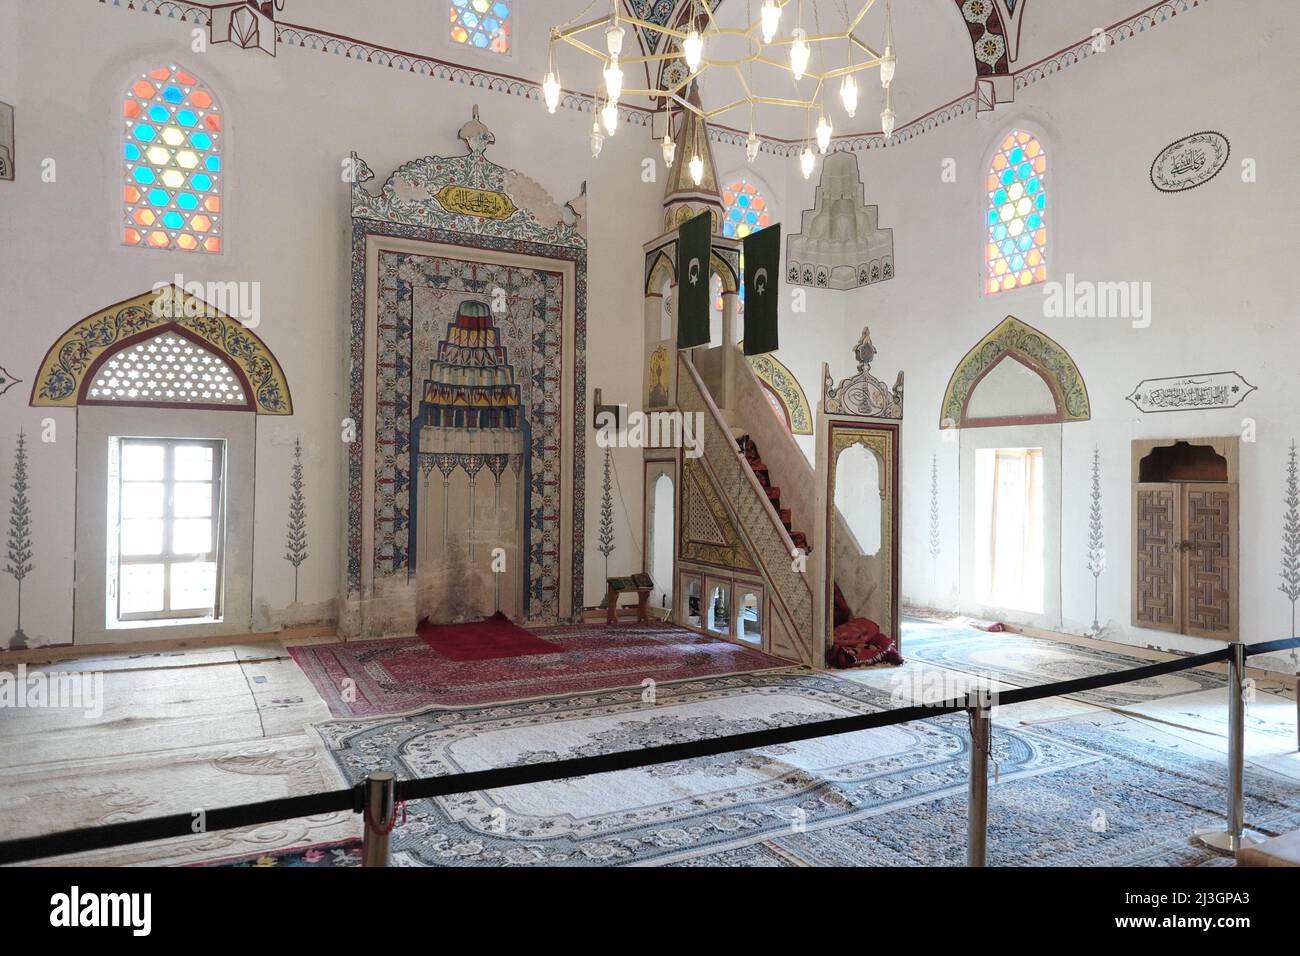 MOSTAR, BOSNIA AND HERZEGOVINA - JULY 11, 2018: interior of Koski Mehmed Pasha Mosque with mihrab and qubba Stock Photo